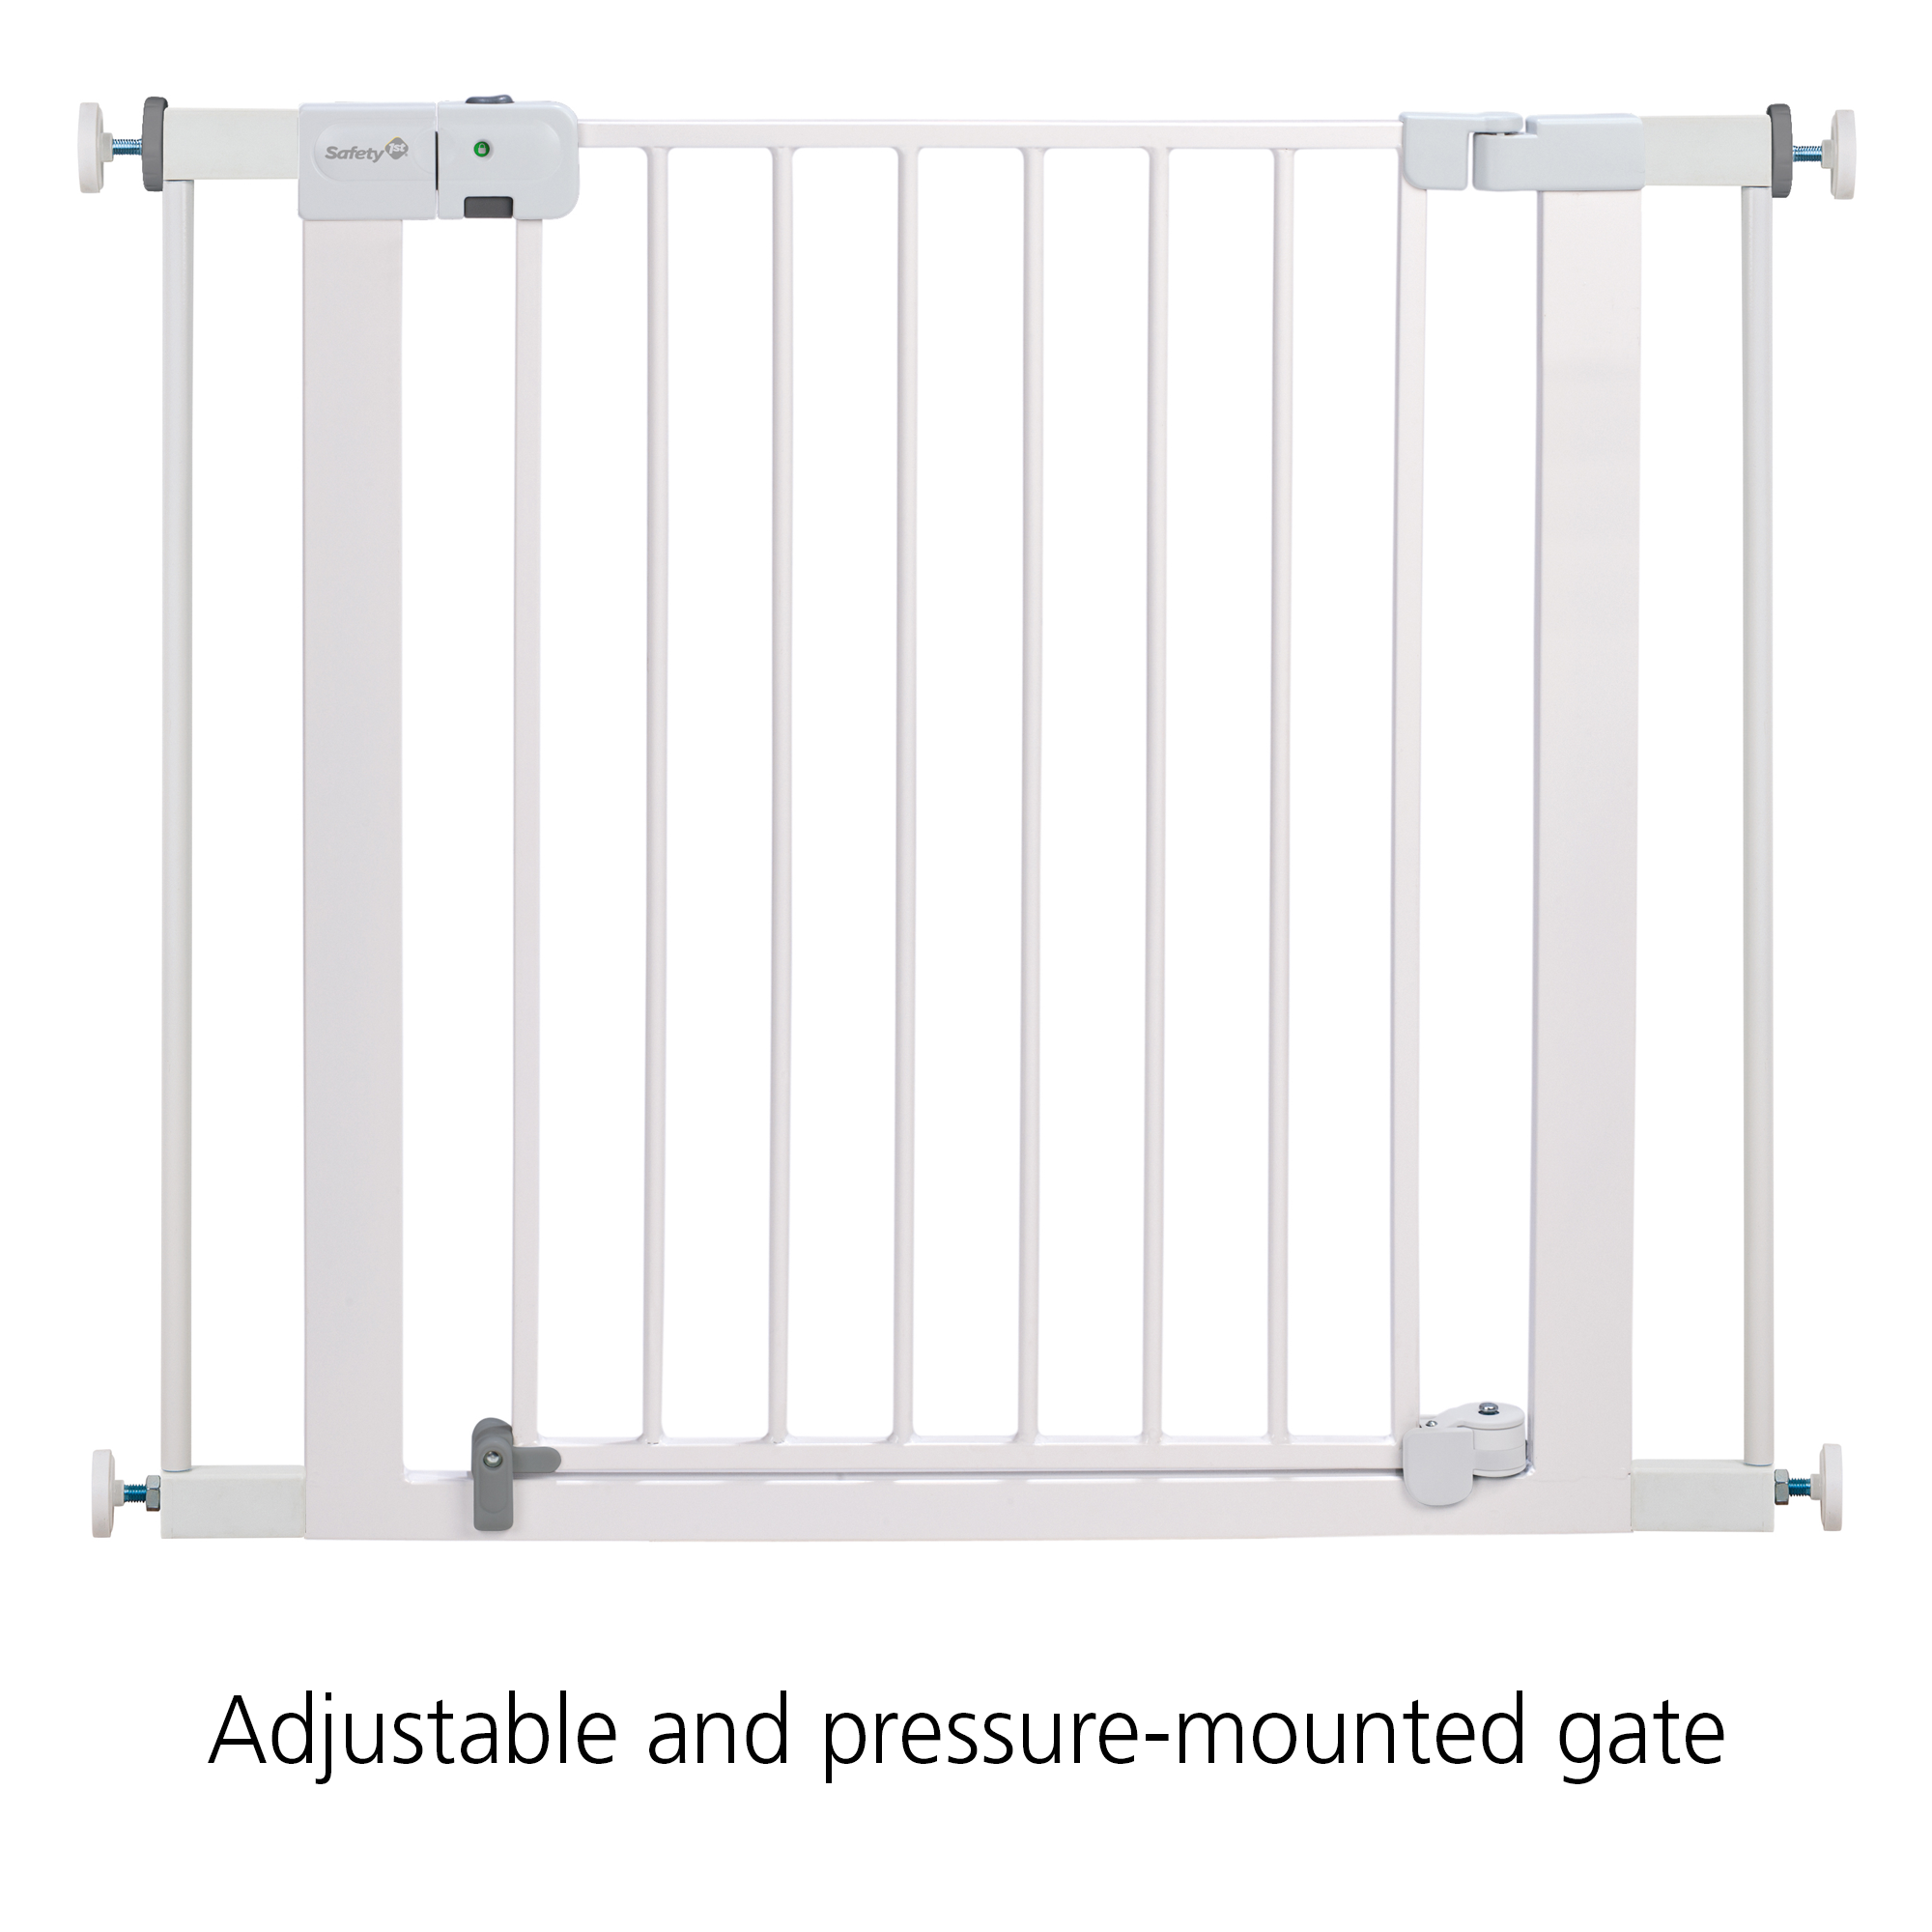 Adjustable and pressure-mounted gate